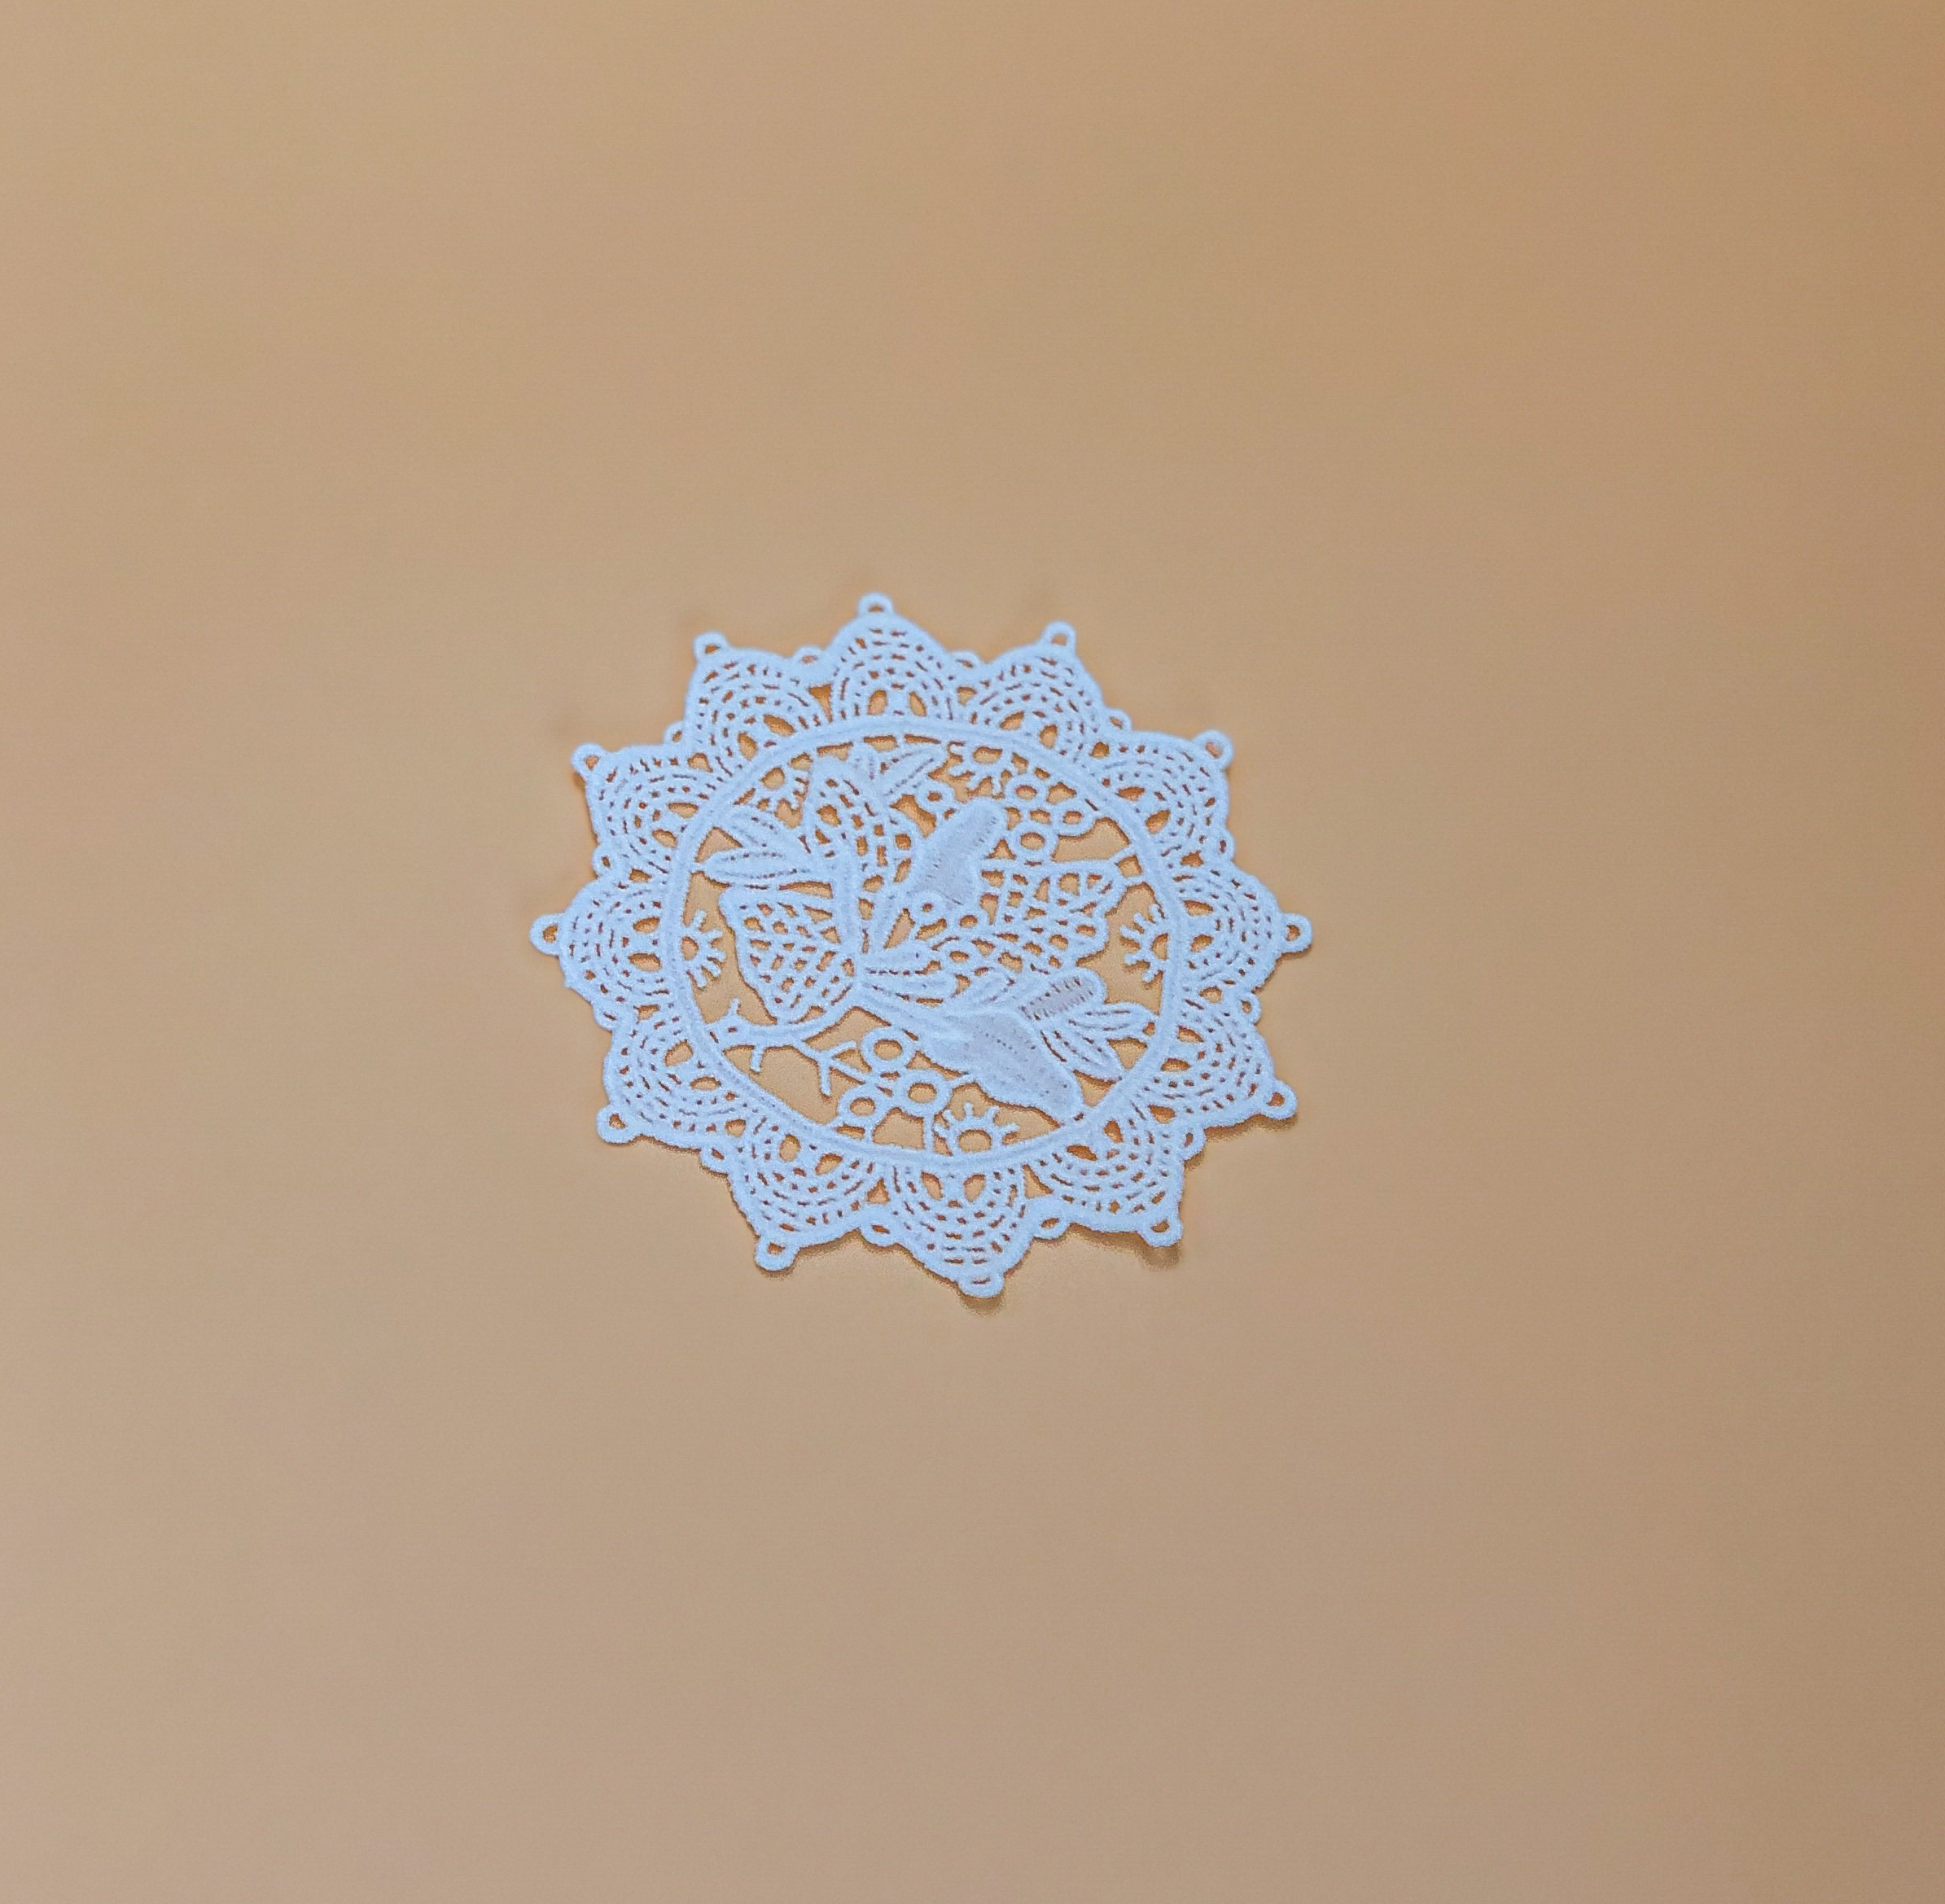 Handmade Lace Coasters by PROSE Tabletop